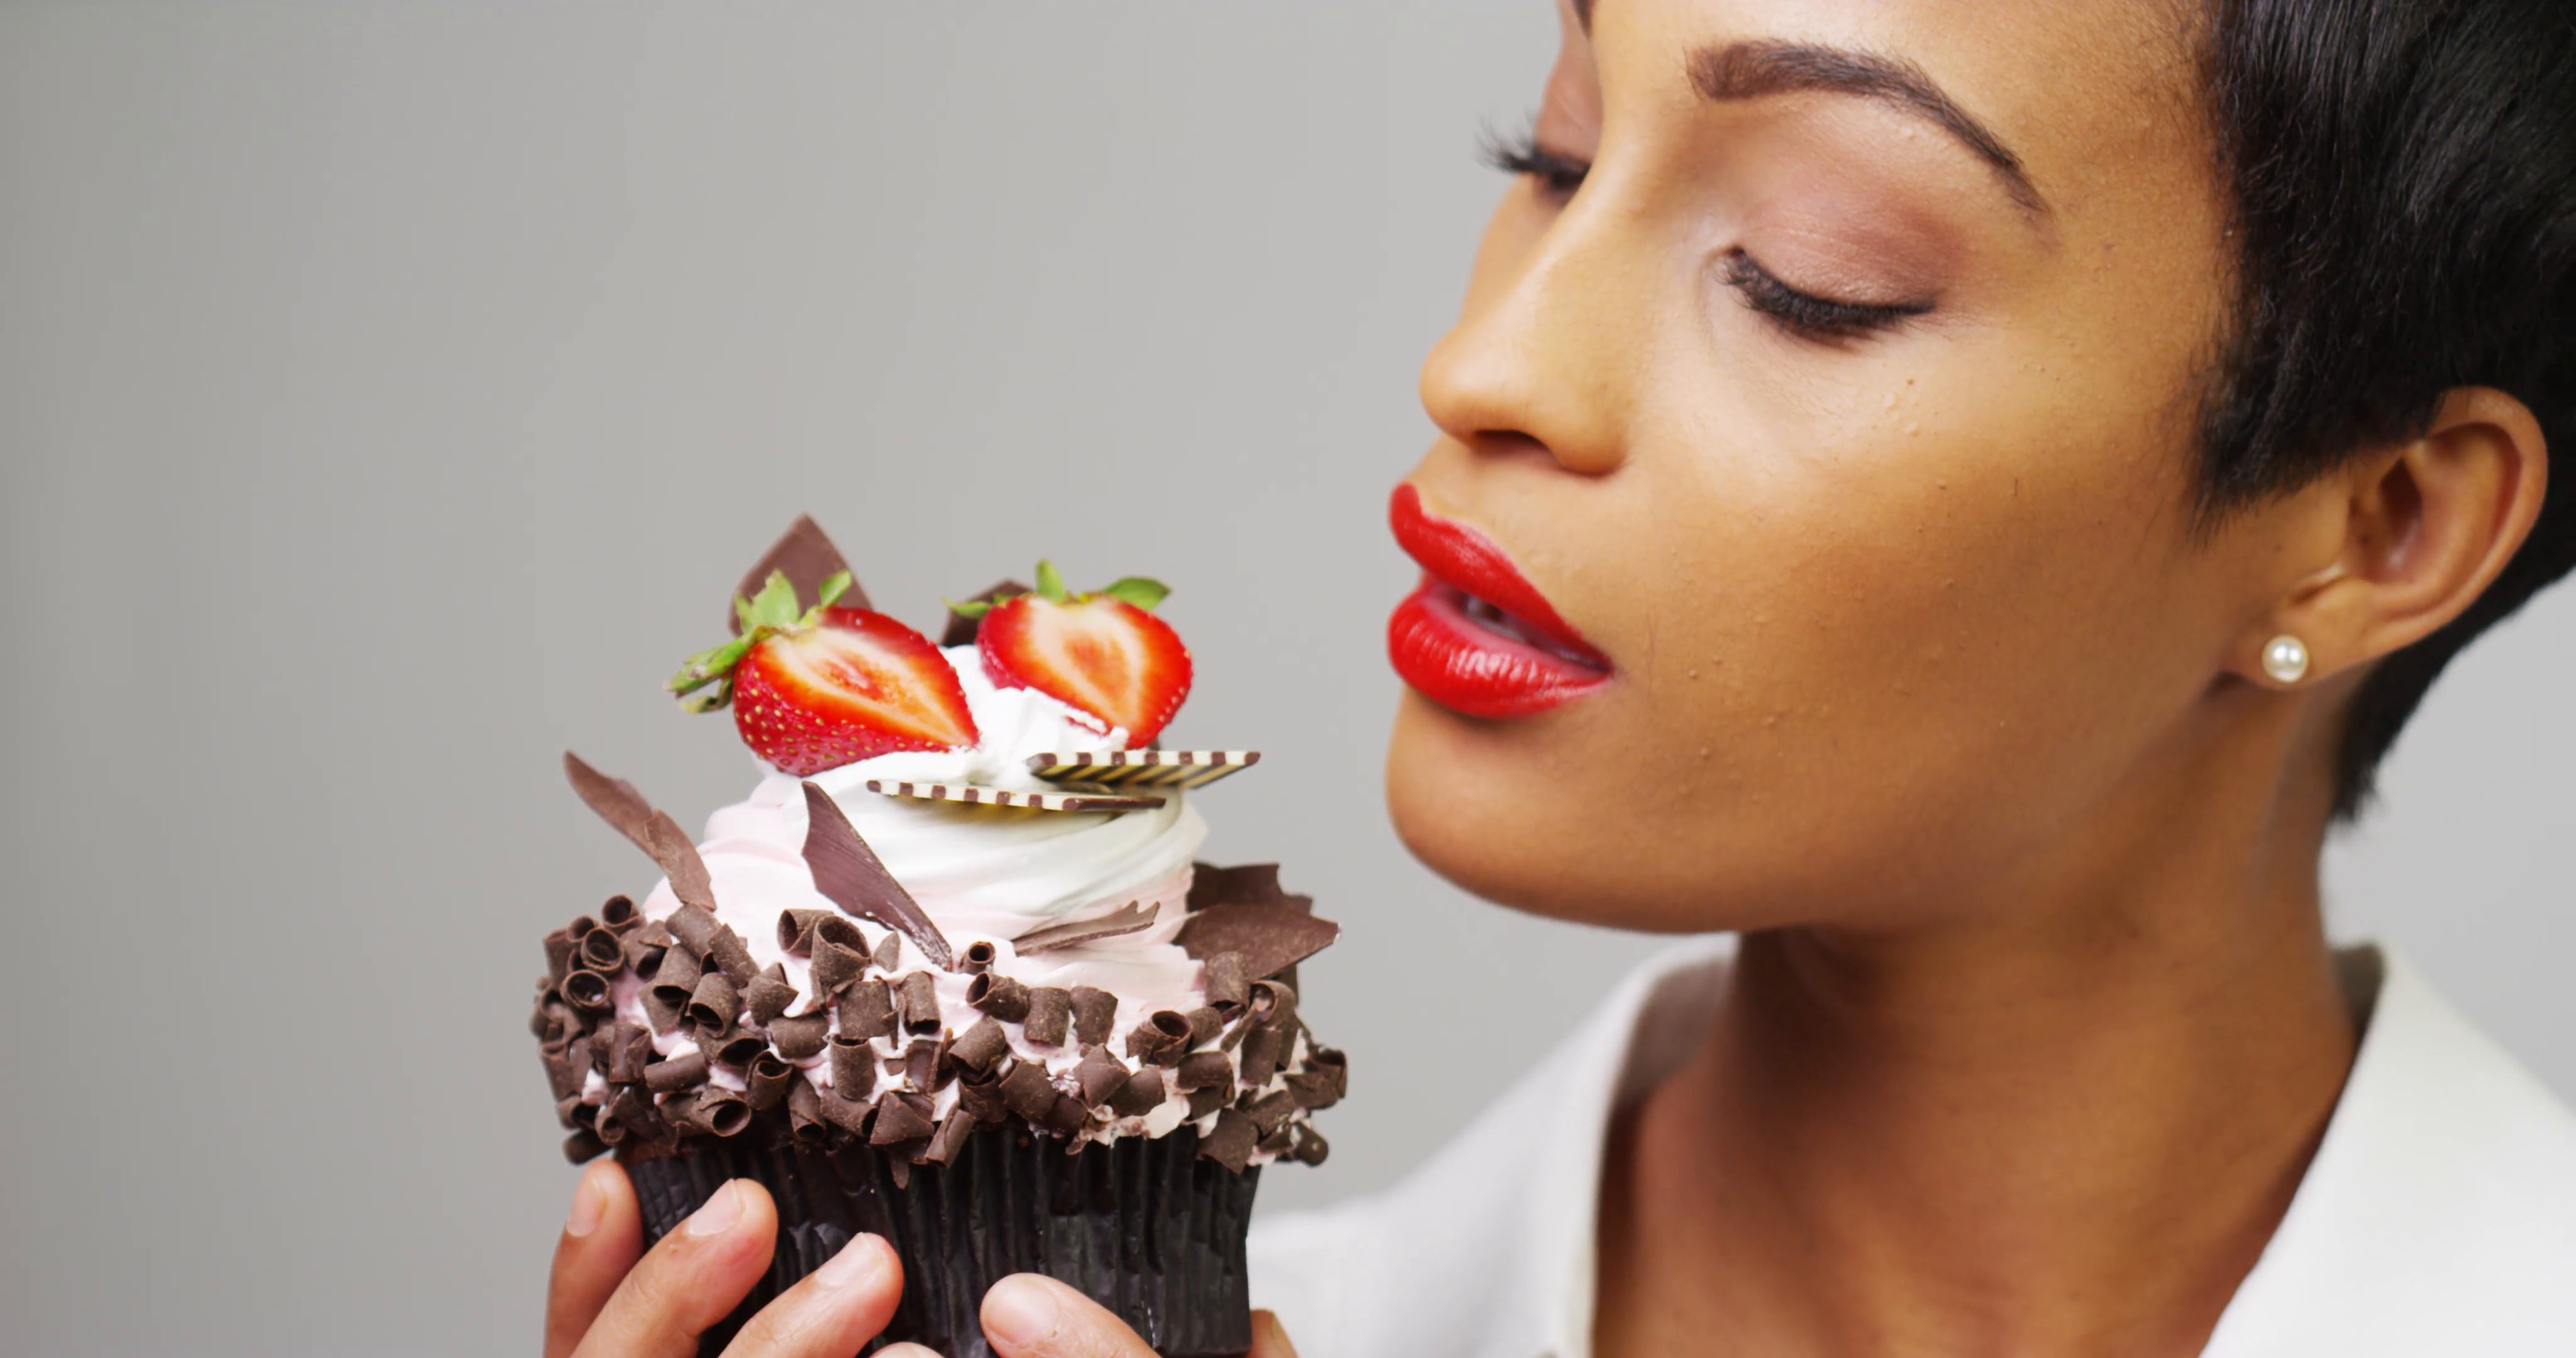 Black woman admiring a fancy dessert cupcake with chocolate and ...